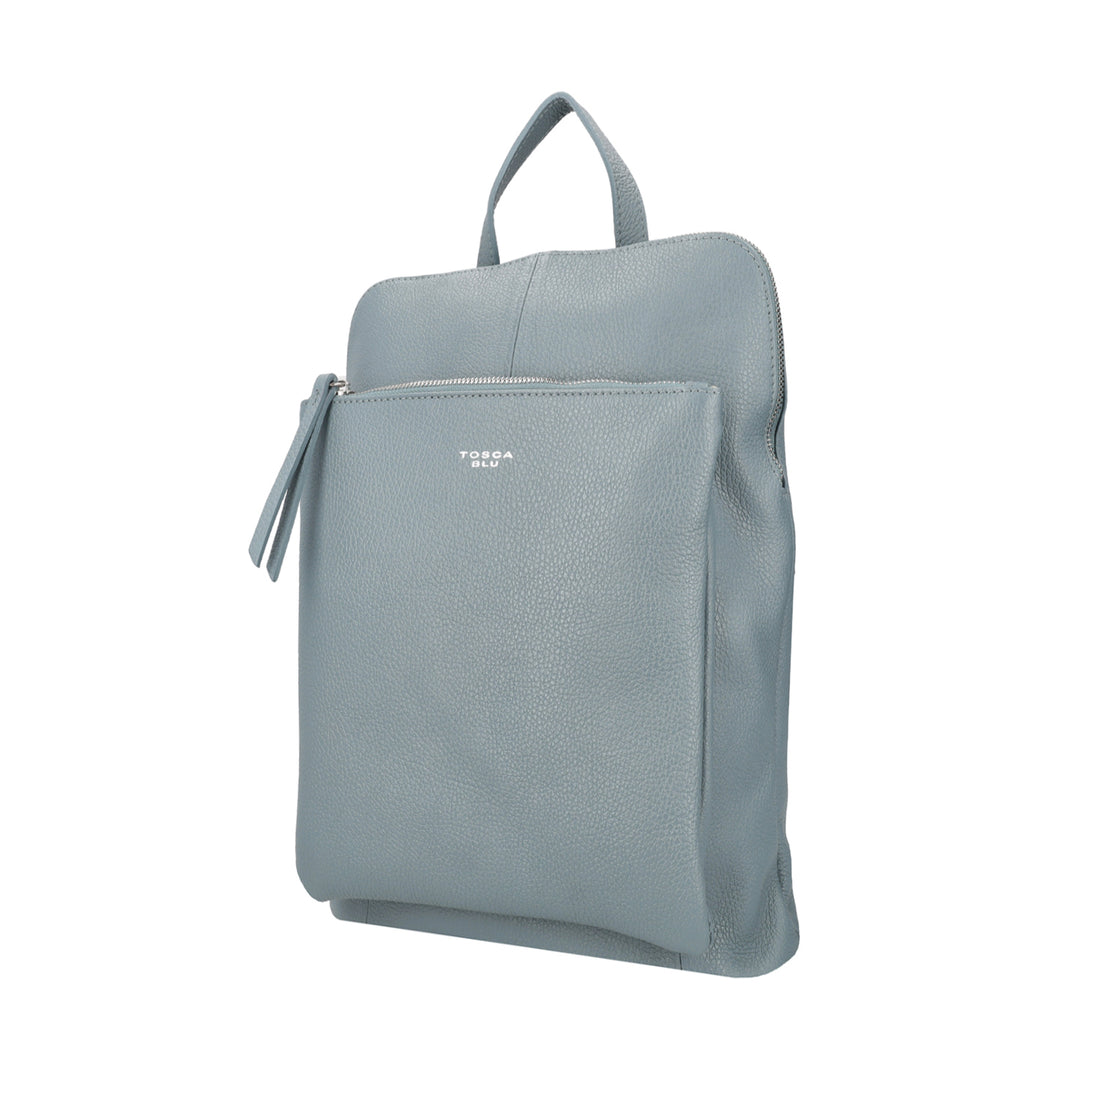 AVIO BLUE LEATHER BACKPACK WITH ZIPPER CLOSURE